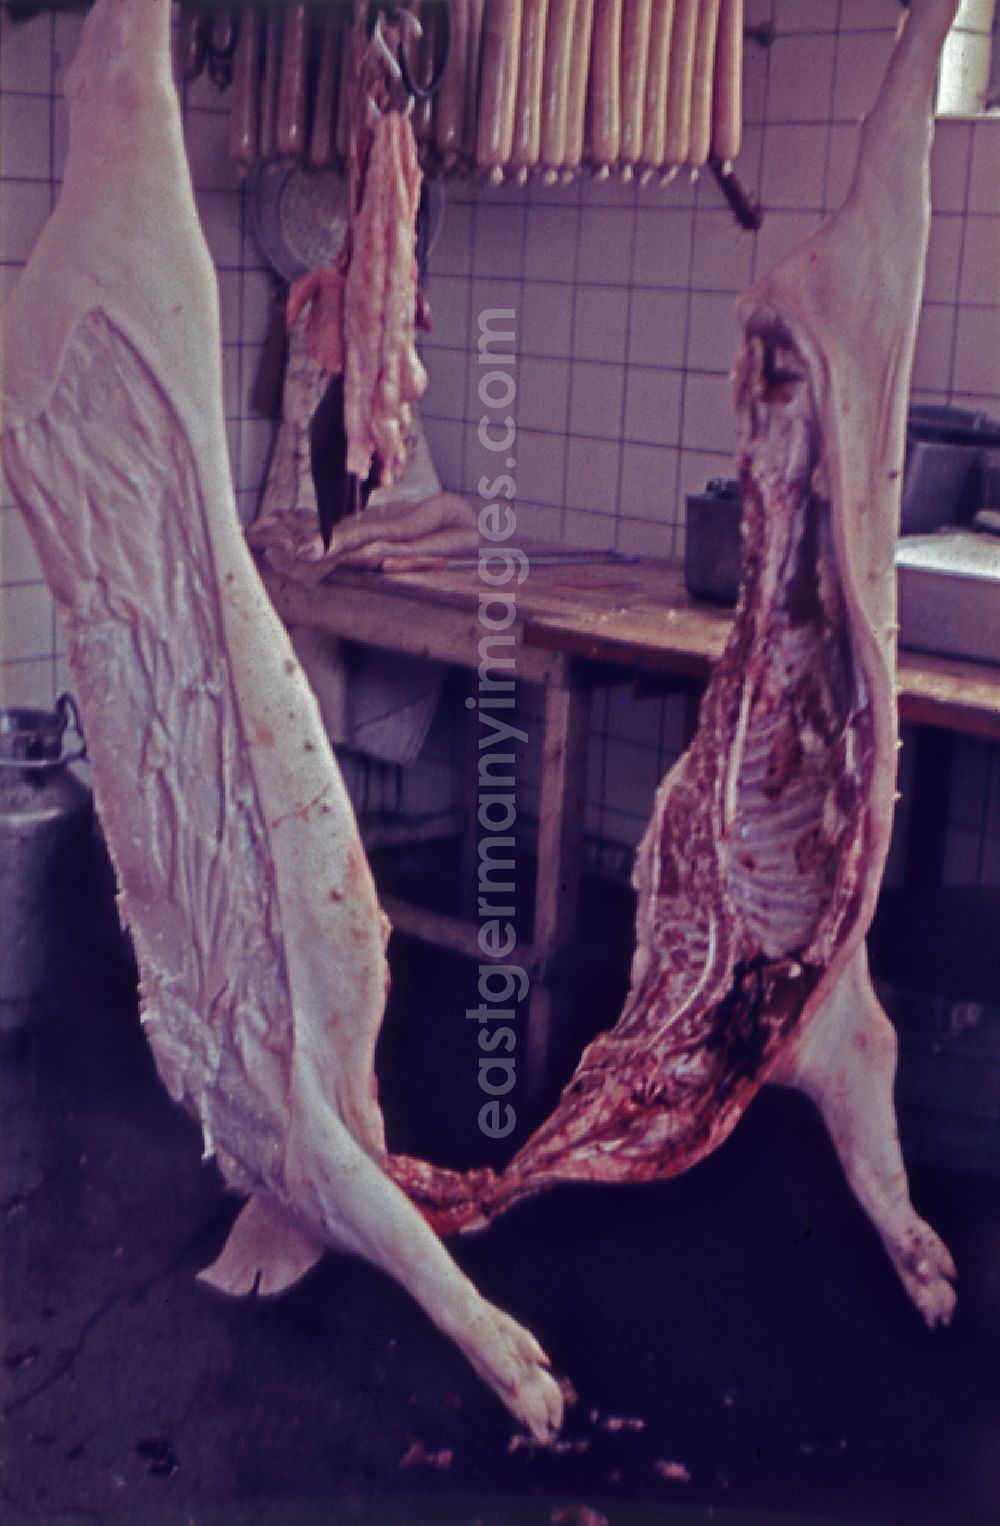 GDR image archive: Stechlin - Slaughtering a pig on a rural farm in Stechlin, Brandenburg on the territory of the former GDR, German Democratic Republic. The two-part pig hangs in a tiled room. Sausages hang in the background